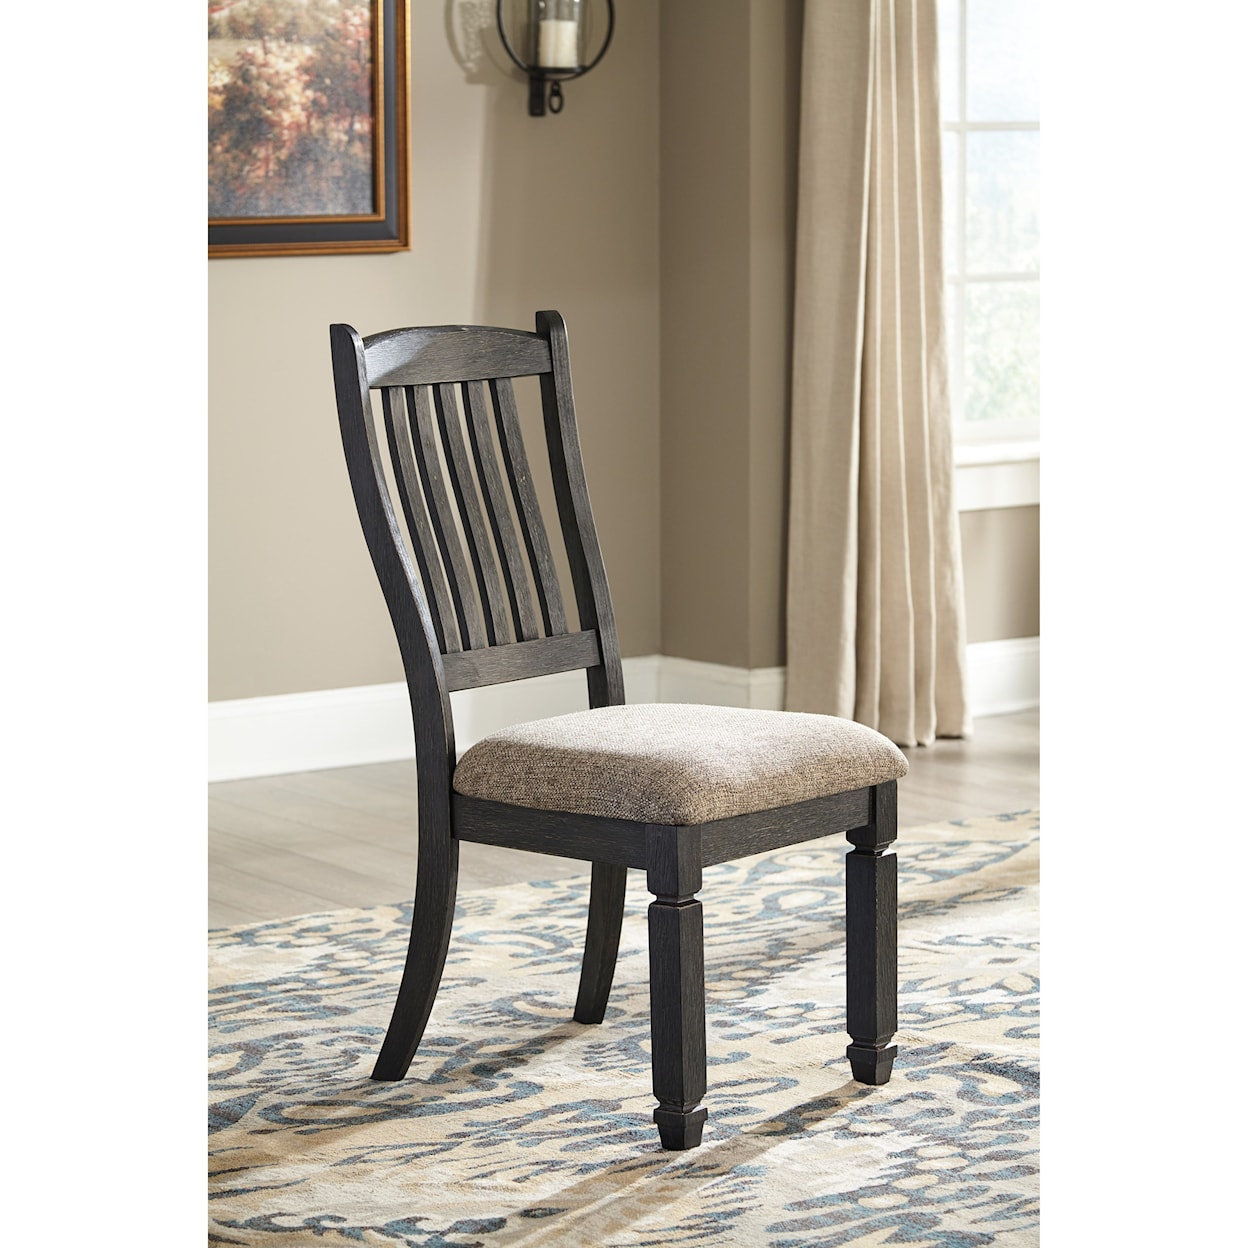 Benchcraft Tyler Creek 6-Piece Table and Chair Set